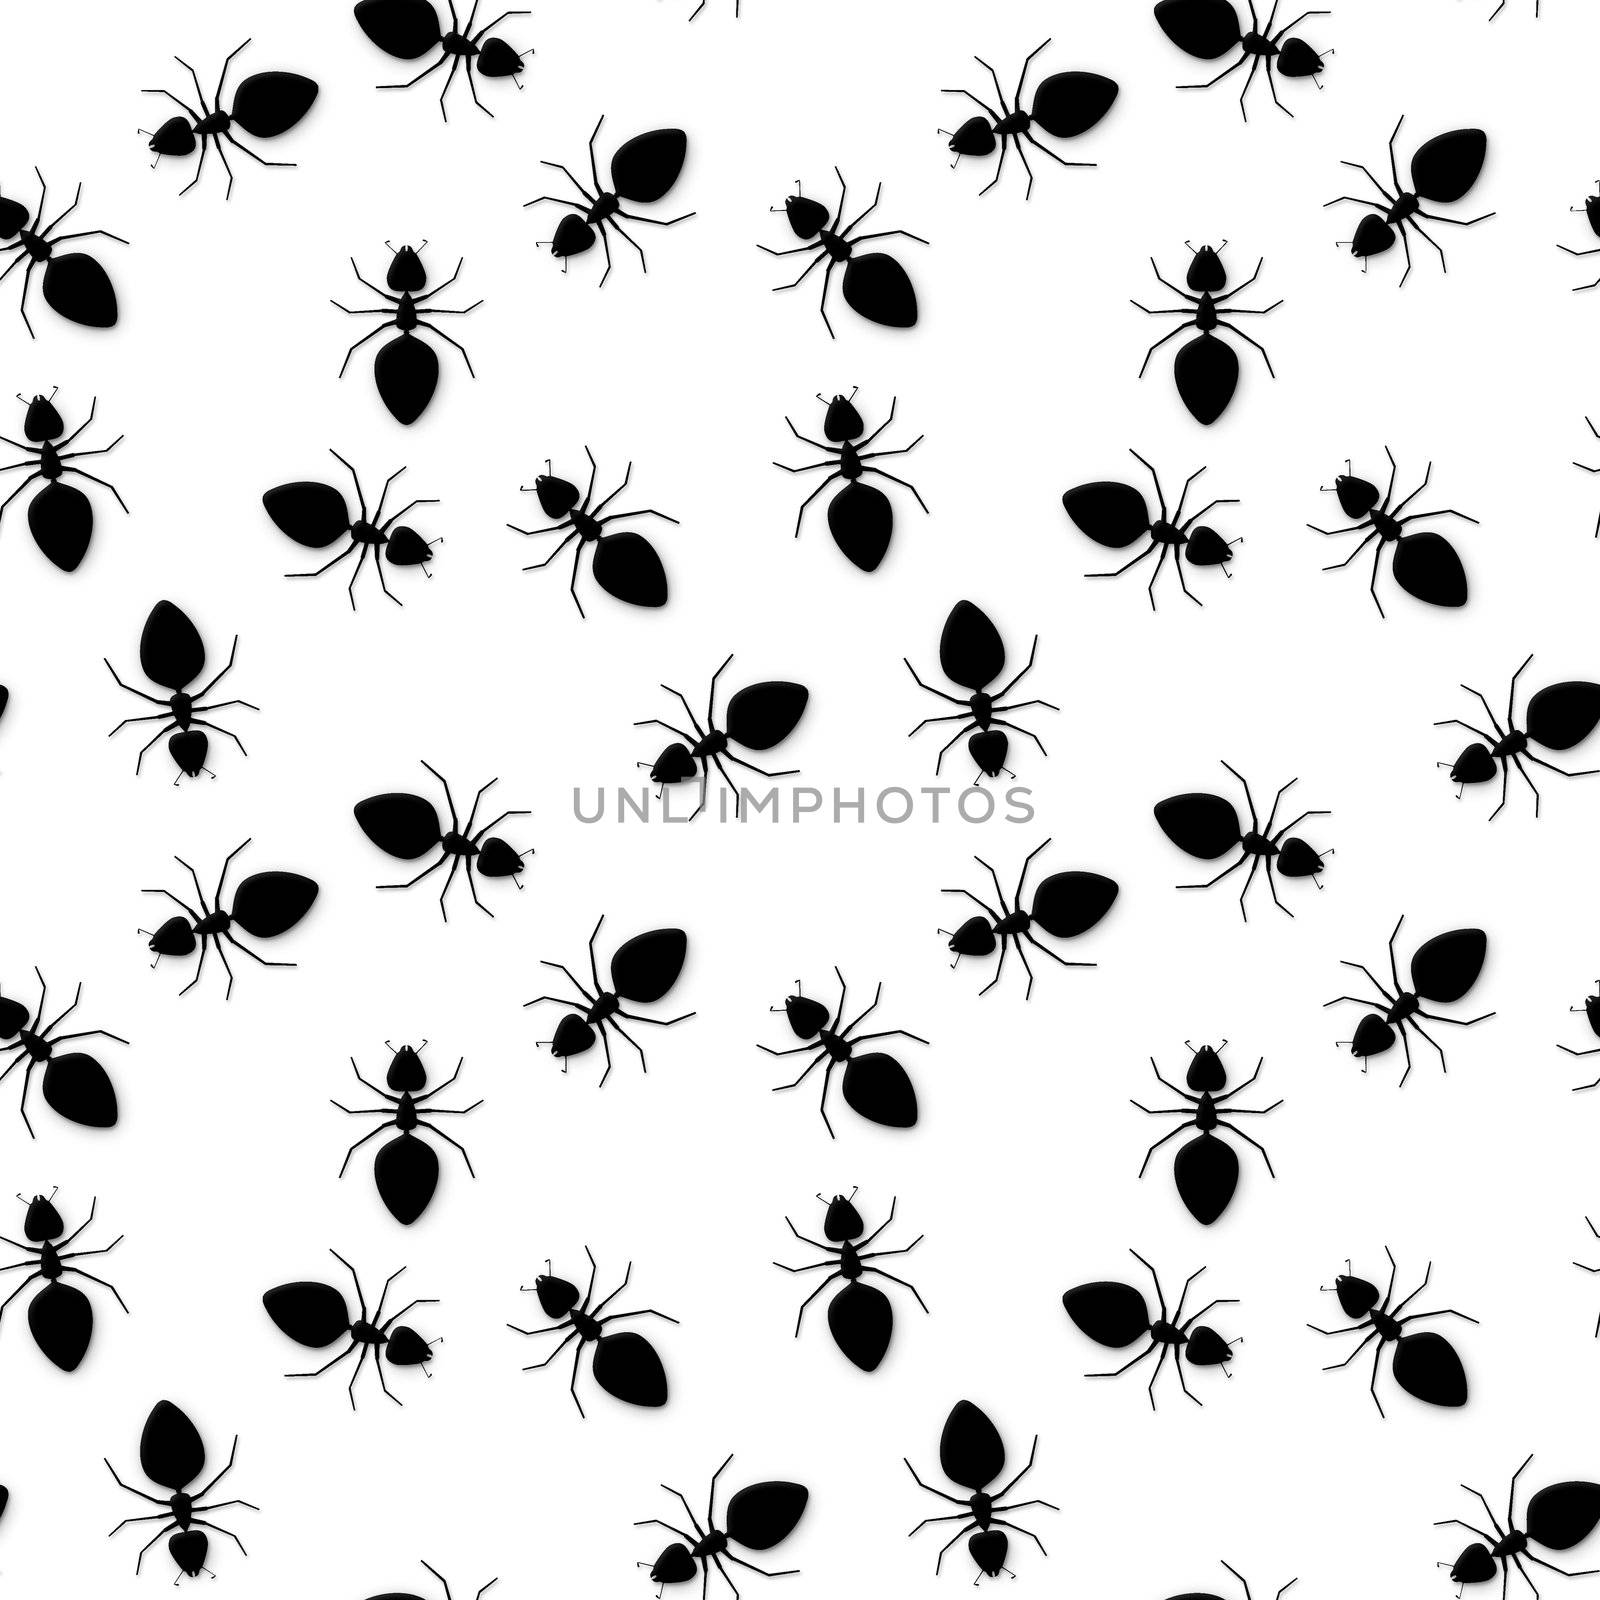 Seamless texture - silhouettes of ants on a white background